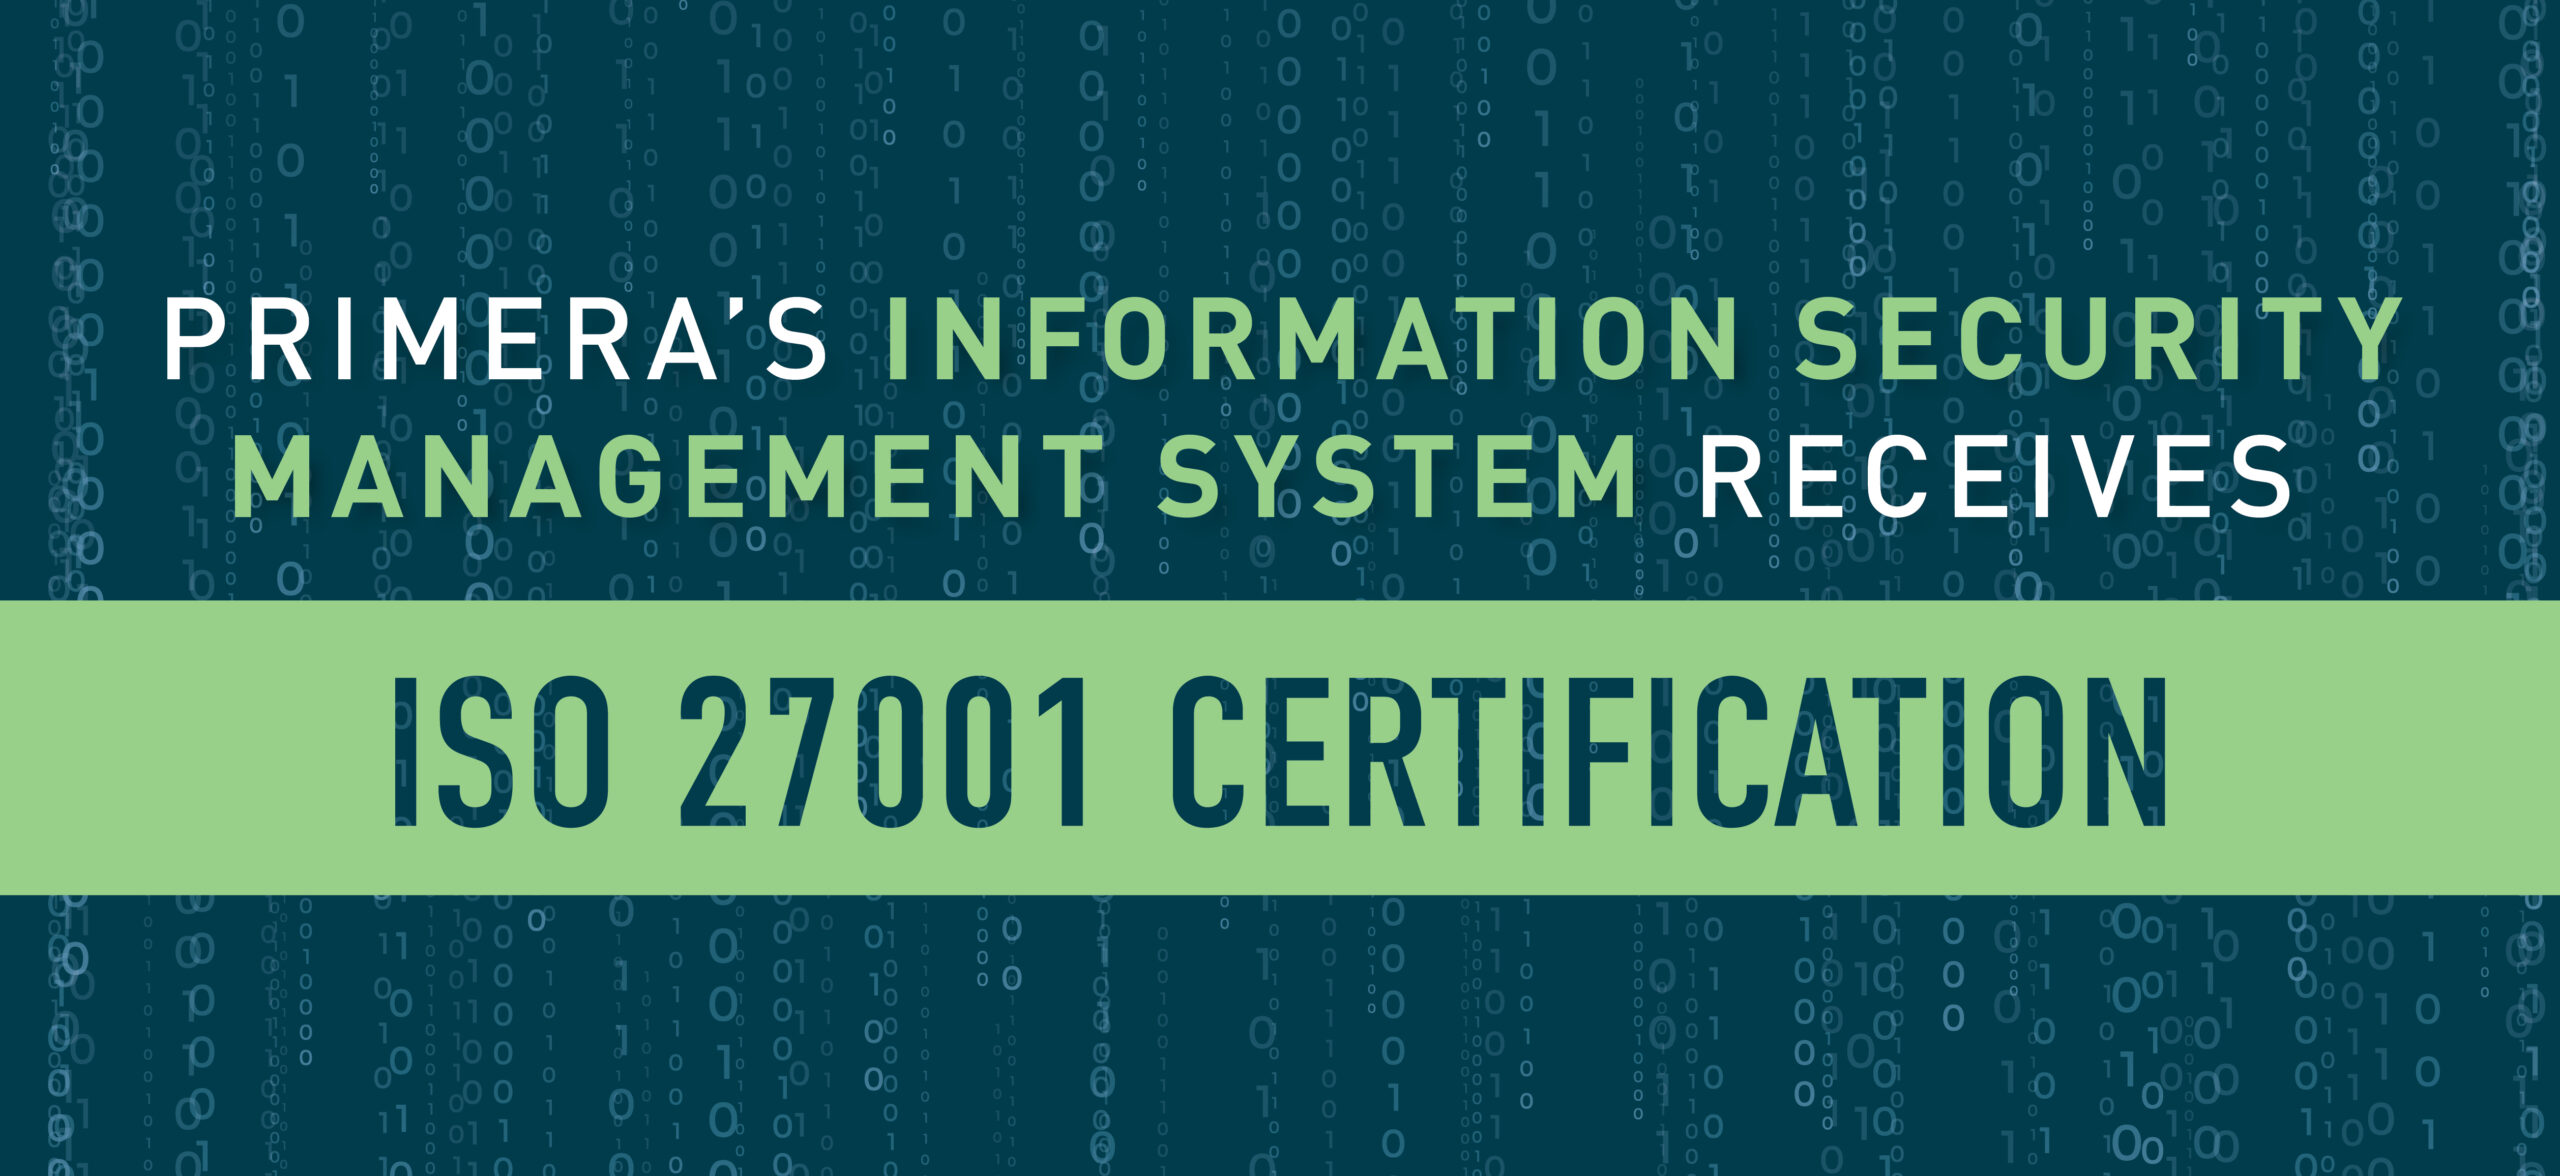 Primera Enhances Information Security System with ISO 27001 Certification